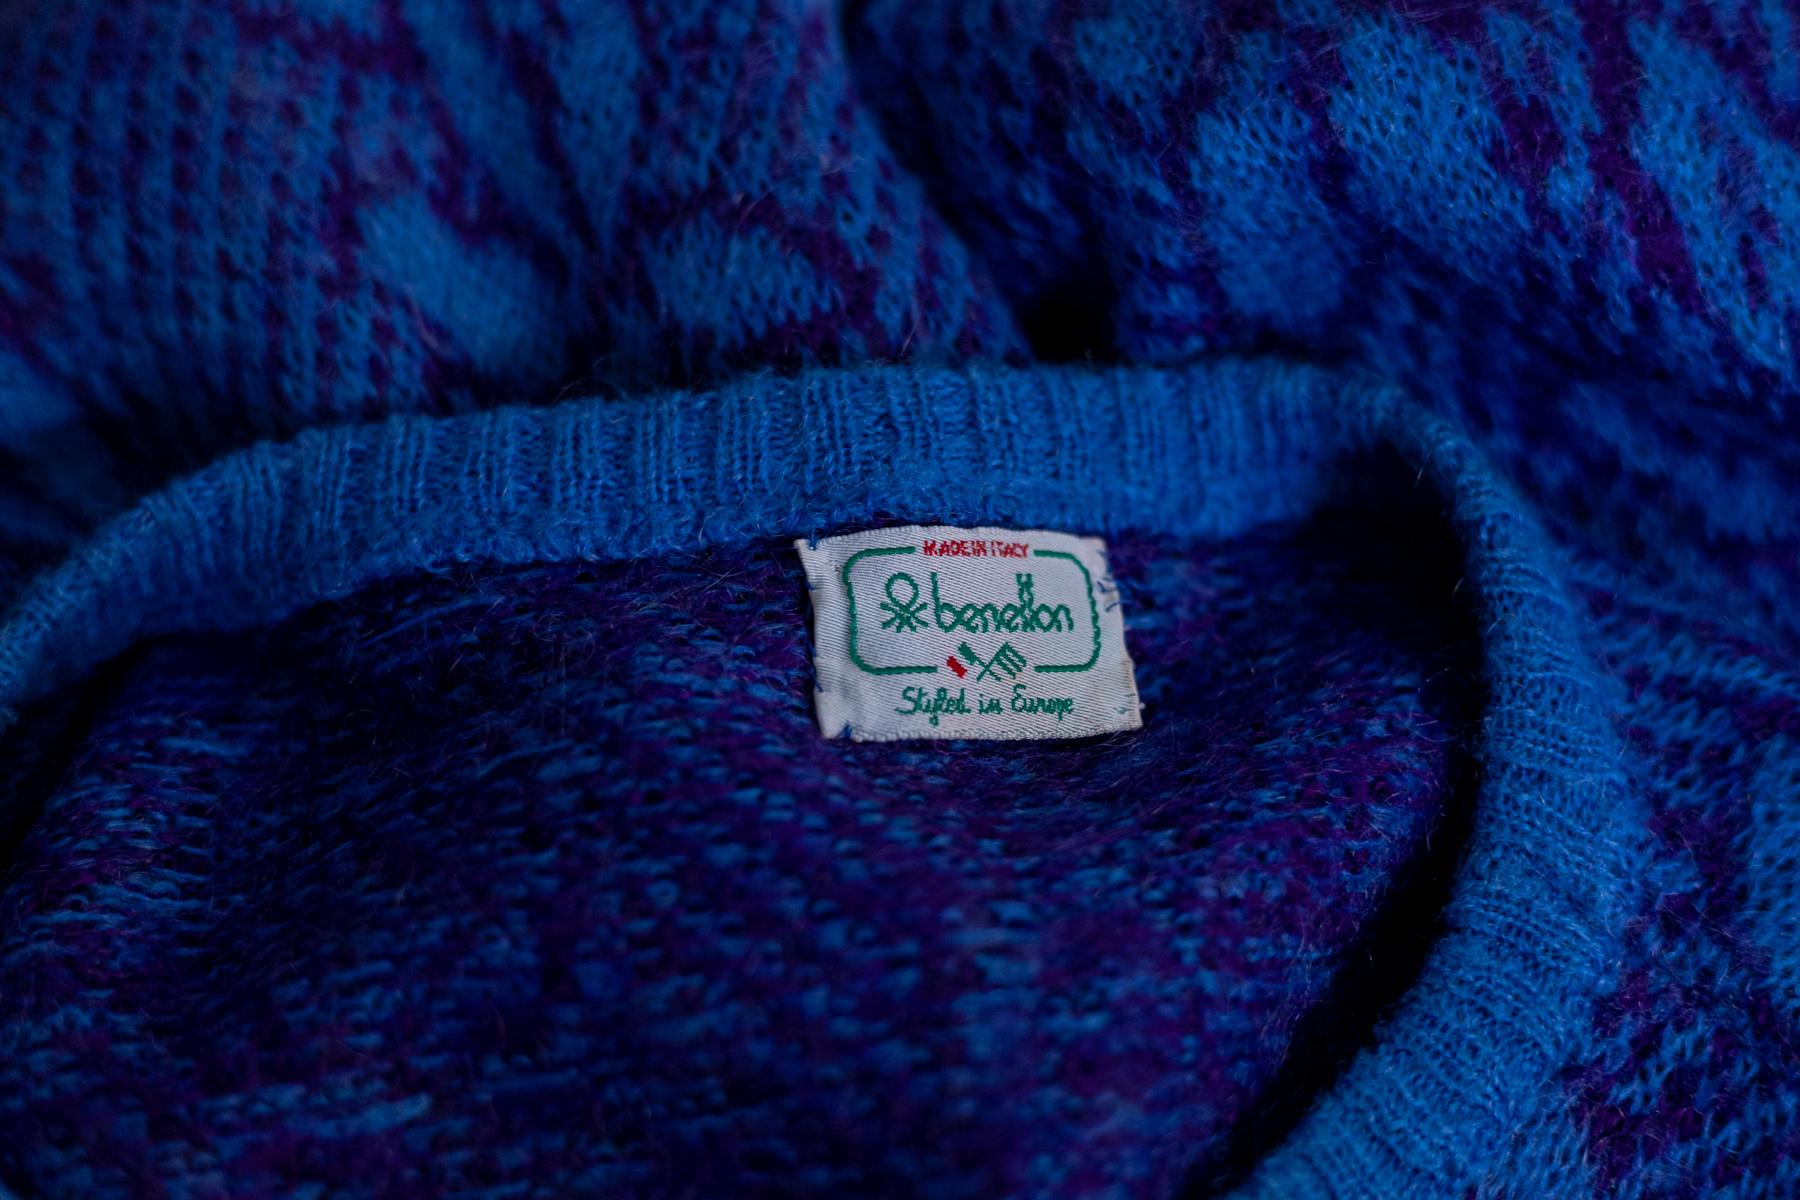 Rare skirt and sweater suit by Benetton from the 1990s, made in Italy.
ORIGINAL LABEL.
The suit consists of a sweater and a skirt, made entirely of blue wool.
The sweater has long sleeves with high, narrow cuffs, but leaves the sleeve soft and not